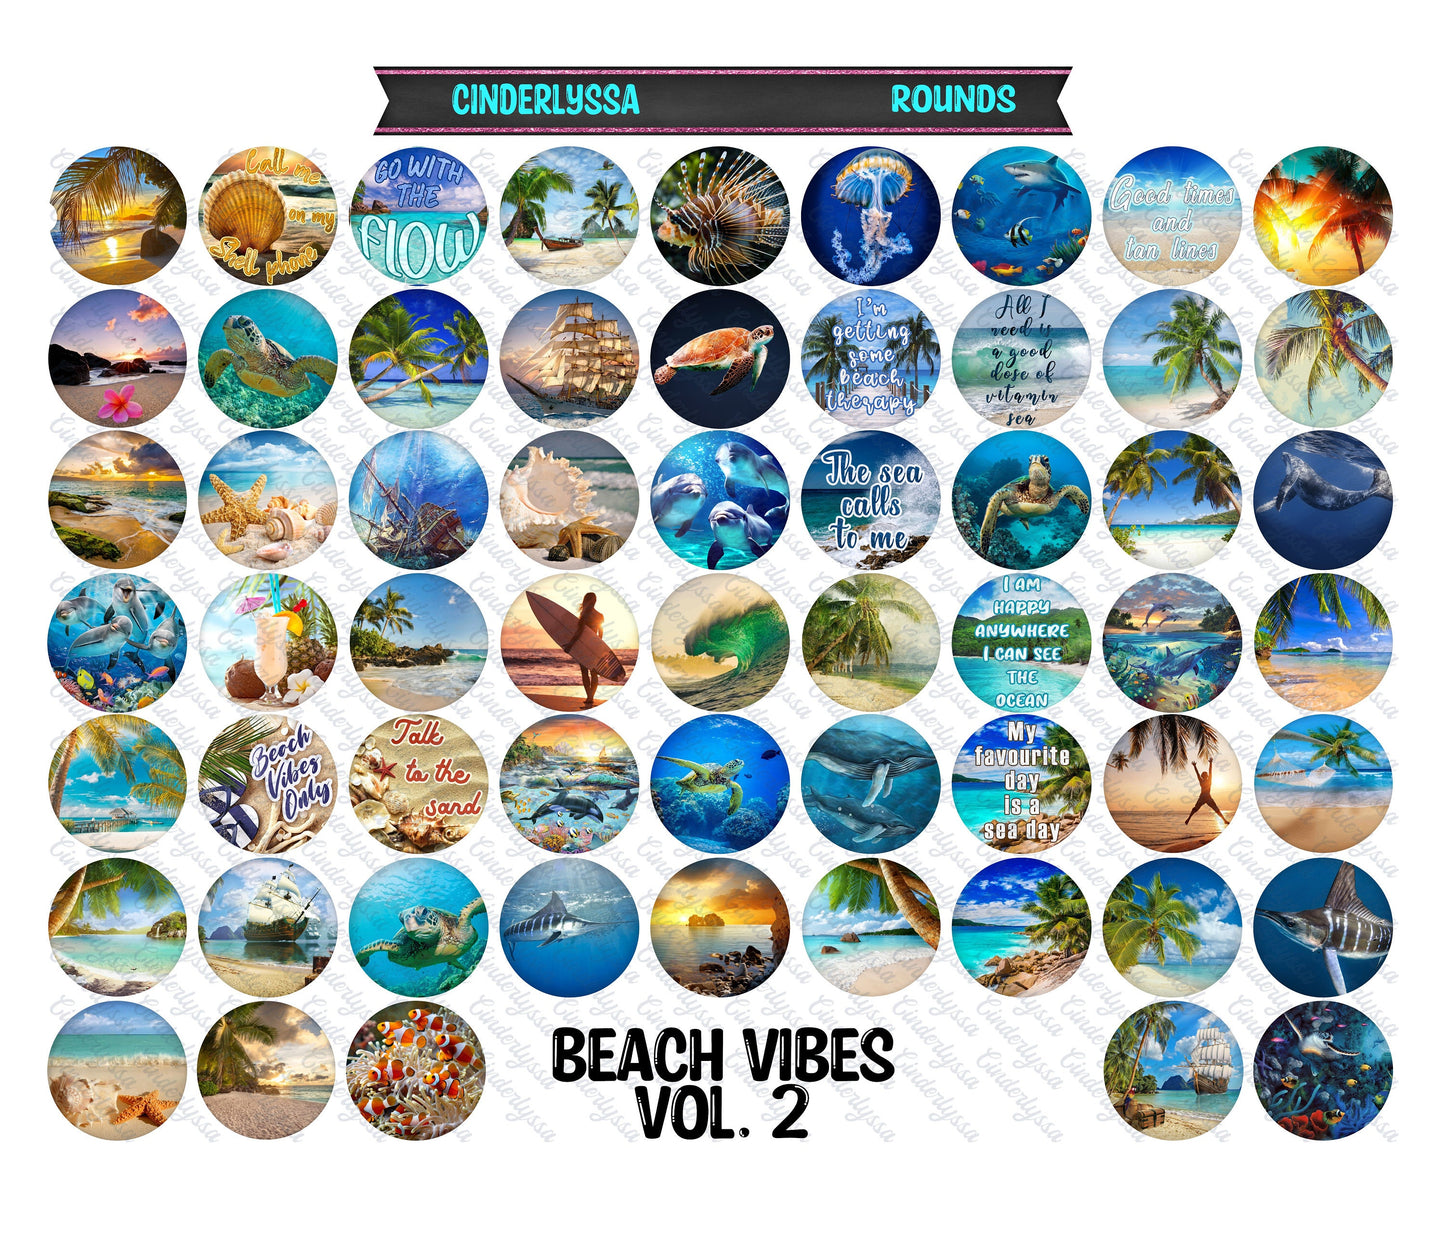 3 inch Round Beach Vibes Vol. 2 Cardstock Only for freshies -NO MOLD: for Aroma Bead Silicone Molds, Car Freshener, Premium Cardstock Image